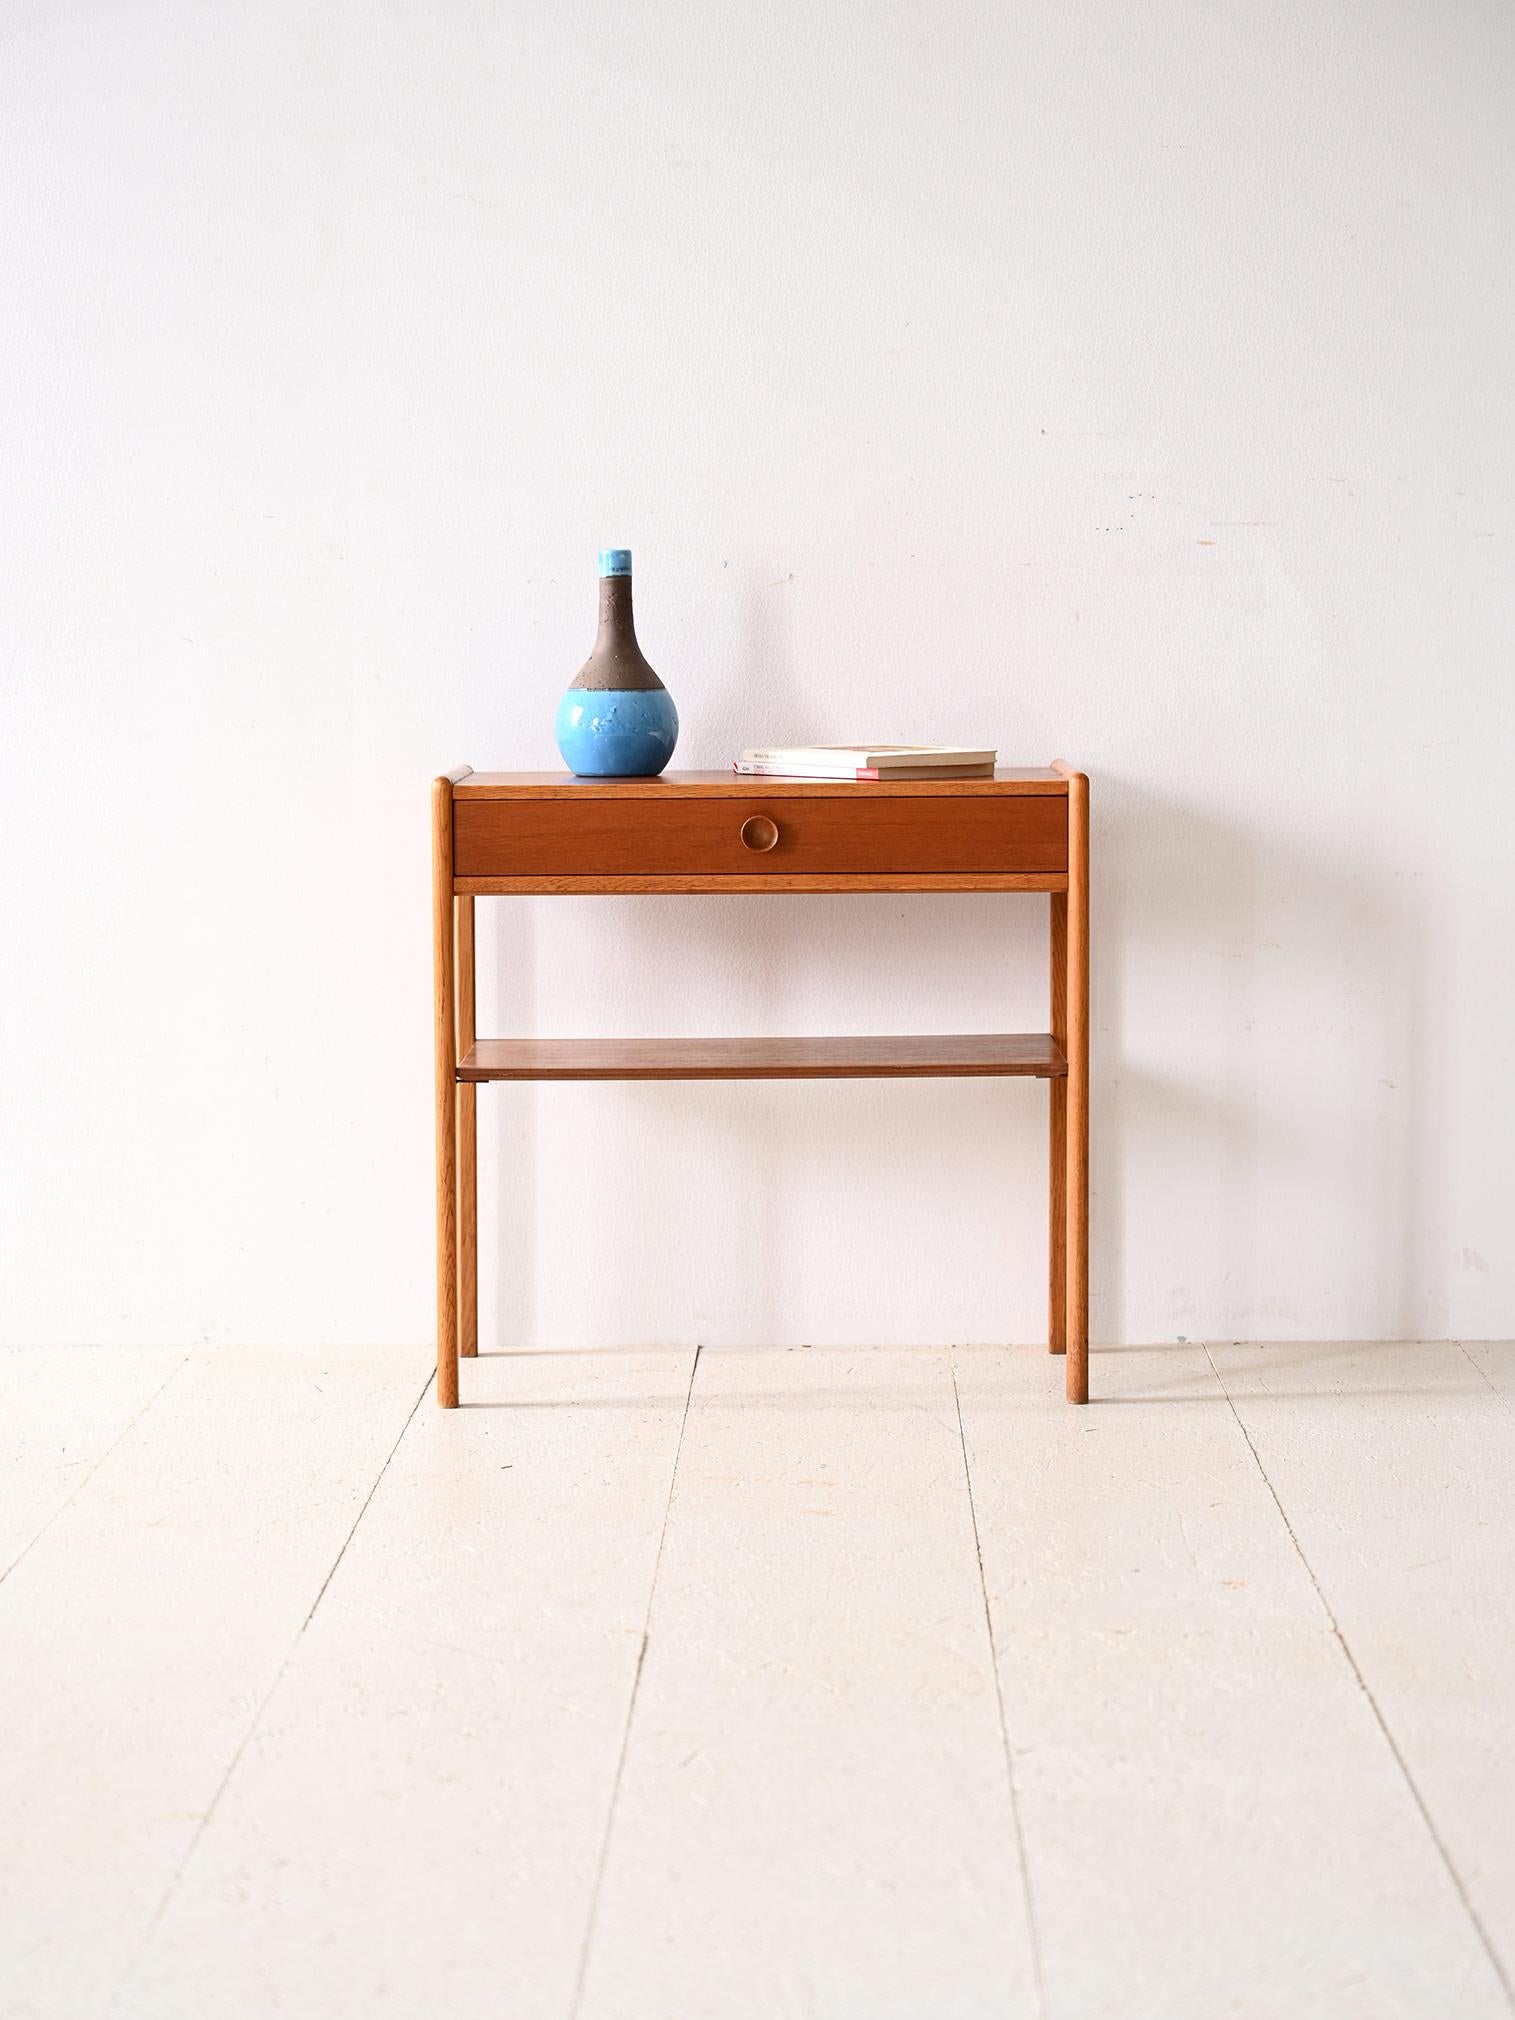 Scandinavian 1960s vintage nightstand.

A piece of modernism that traces the lines and taste of mid-century Scandinavian design.
The rectangular teak top features clear oak profiles that together with the legs create an interesting color effect and